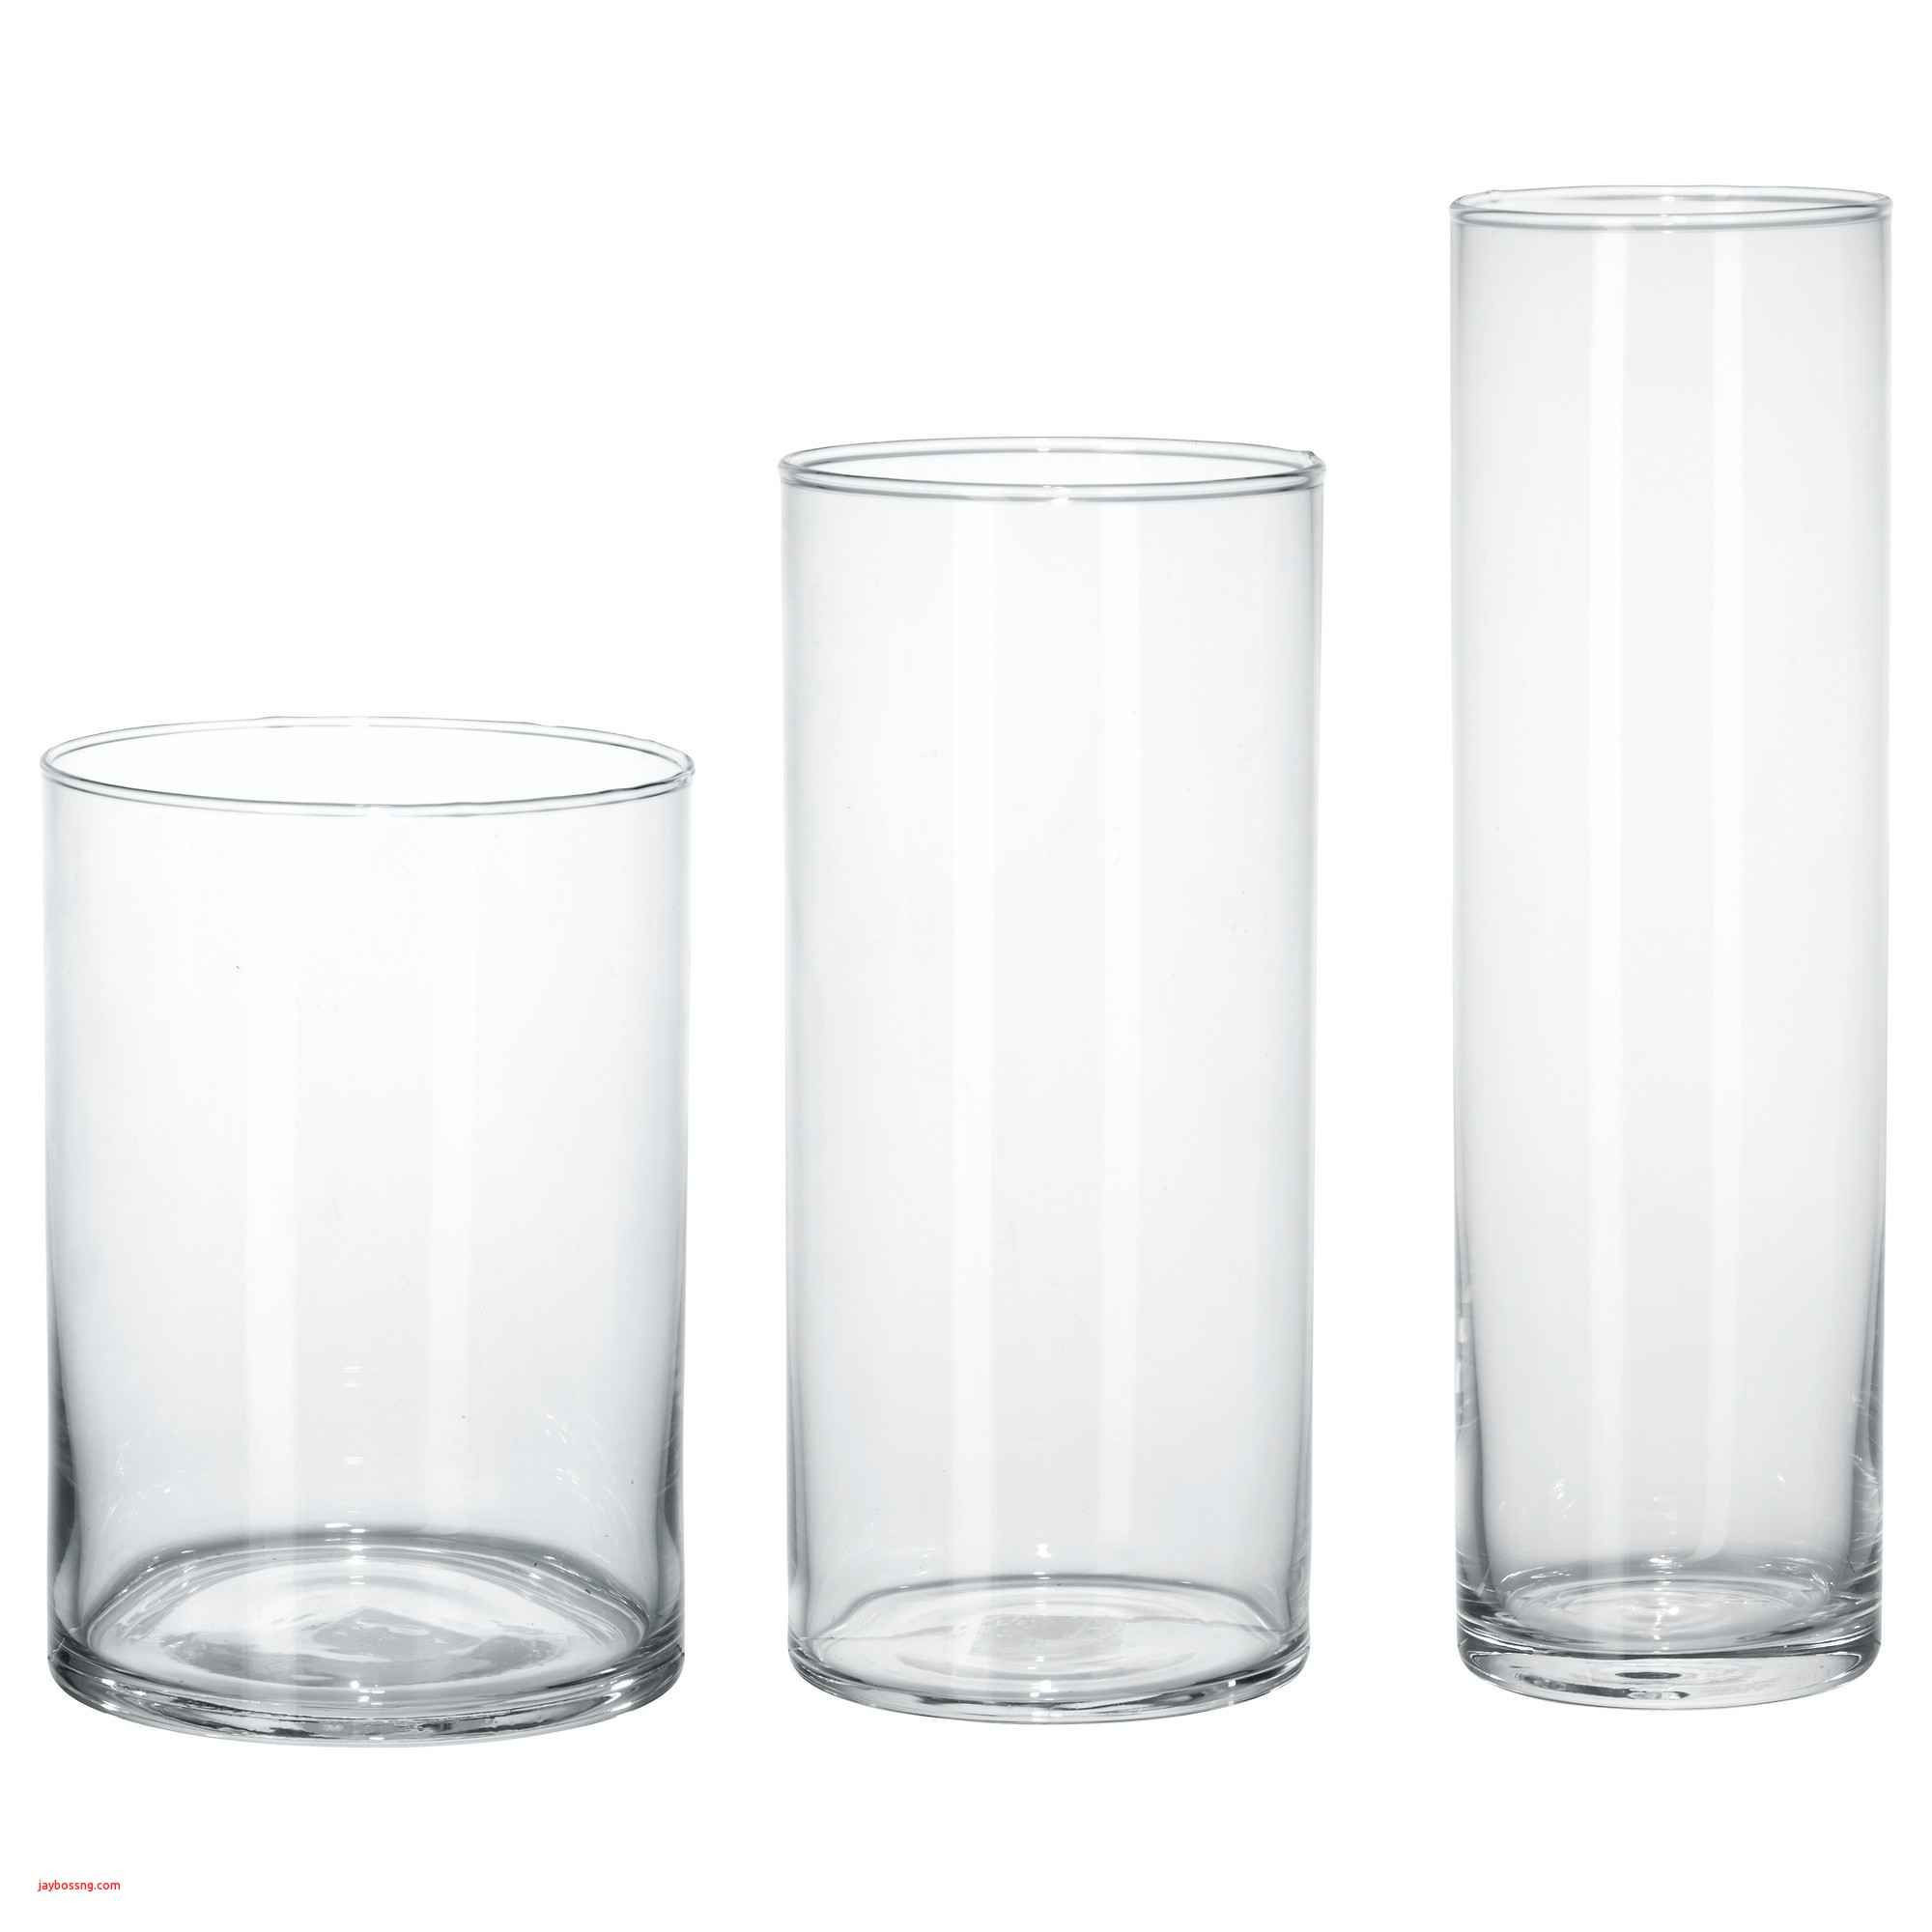 10 Trendy White Vase with Holes 2024 free download white vase with holes of brown glass vase fresh ikea white table created pe s5h vases ikea within brown glass vase fresh ikea white table created pe s5h vases ikea vase i 0d bladet